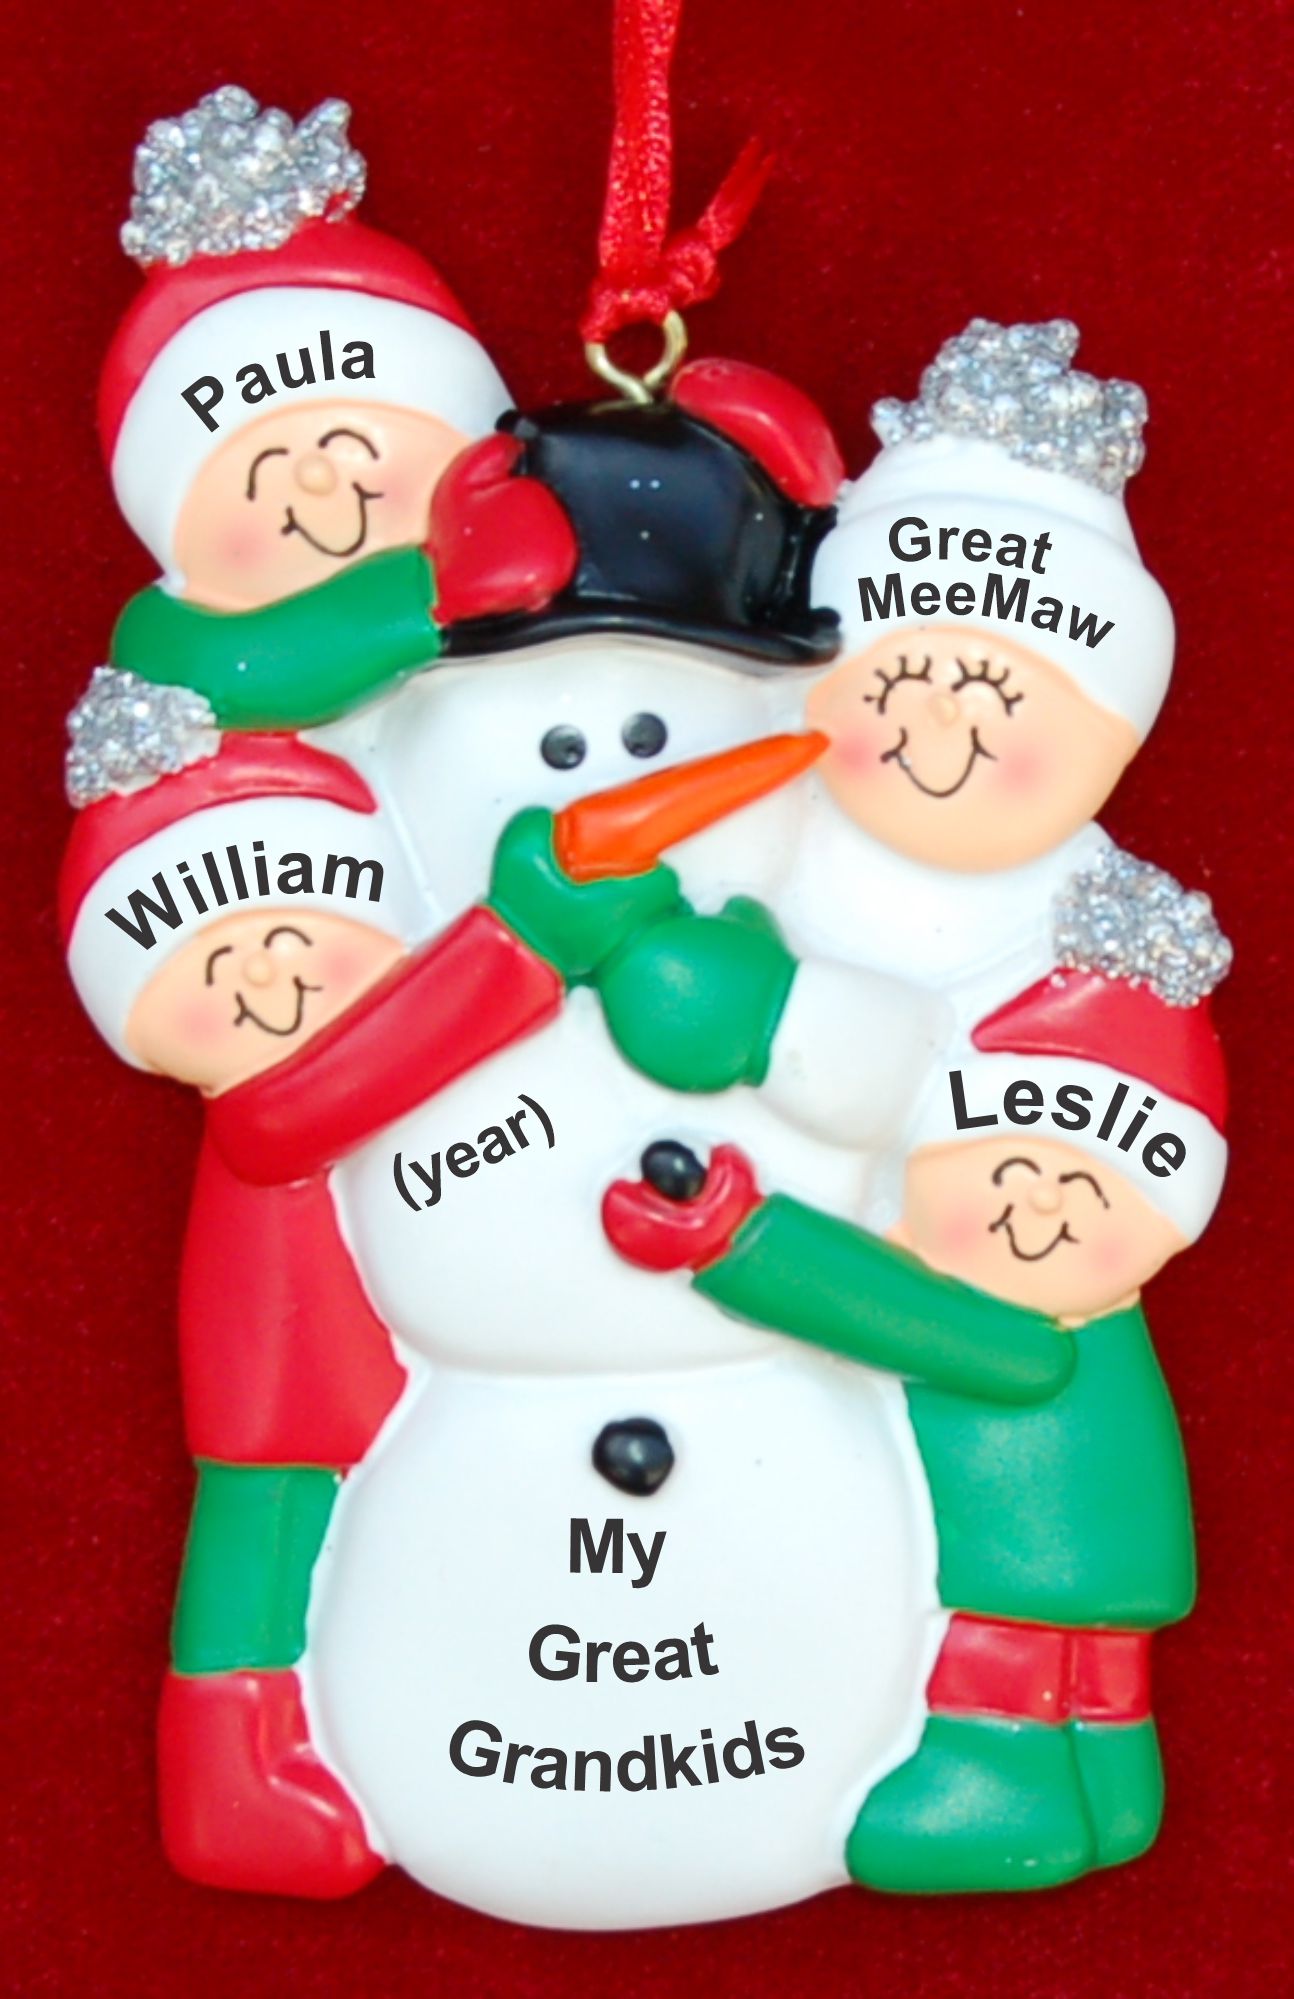 My 3 Great Grandkids with Great Grandmother Christmas Ornament Making Snowman Personalized by RussellRhodes.com